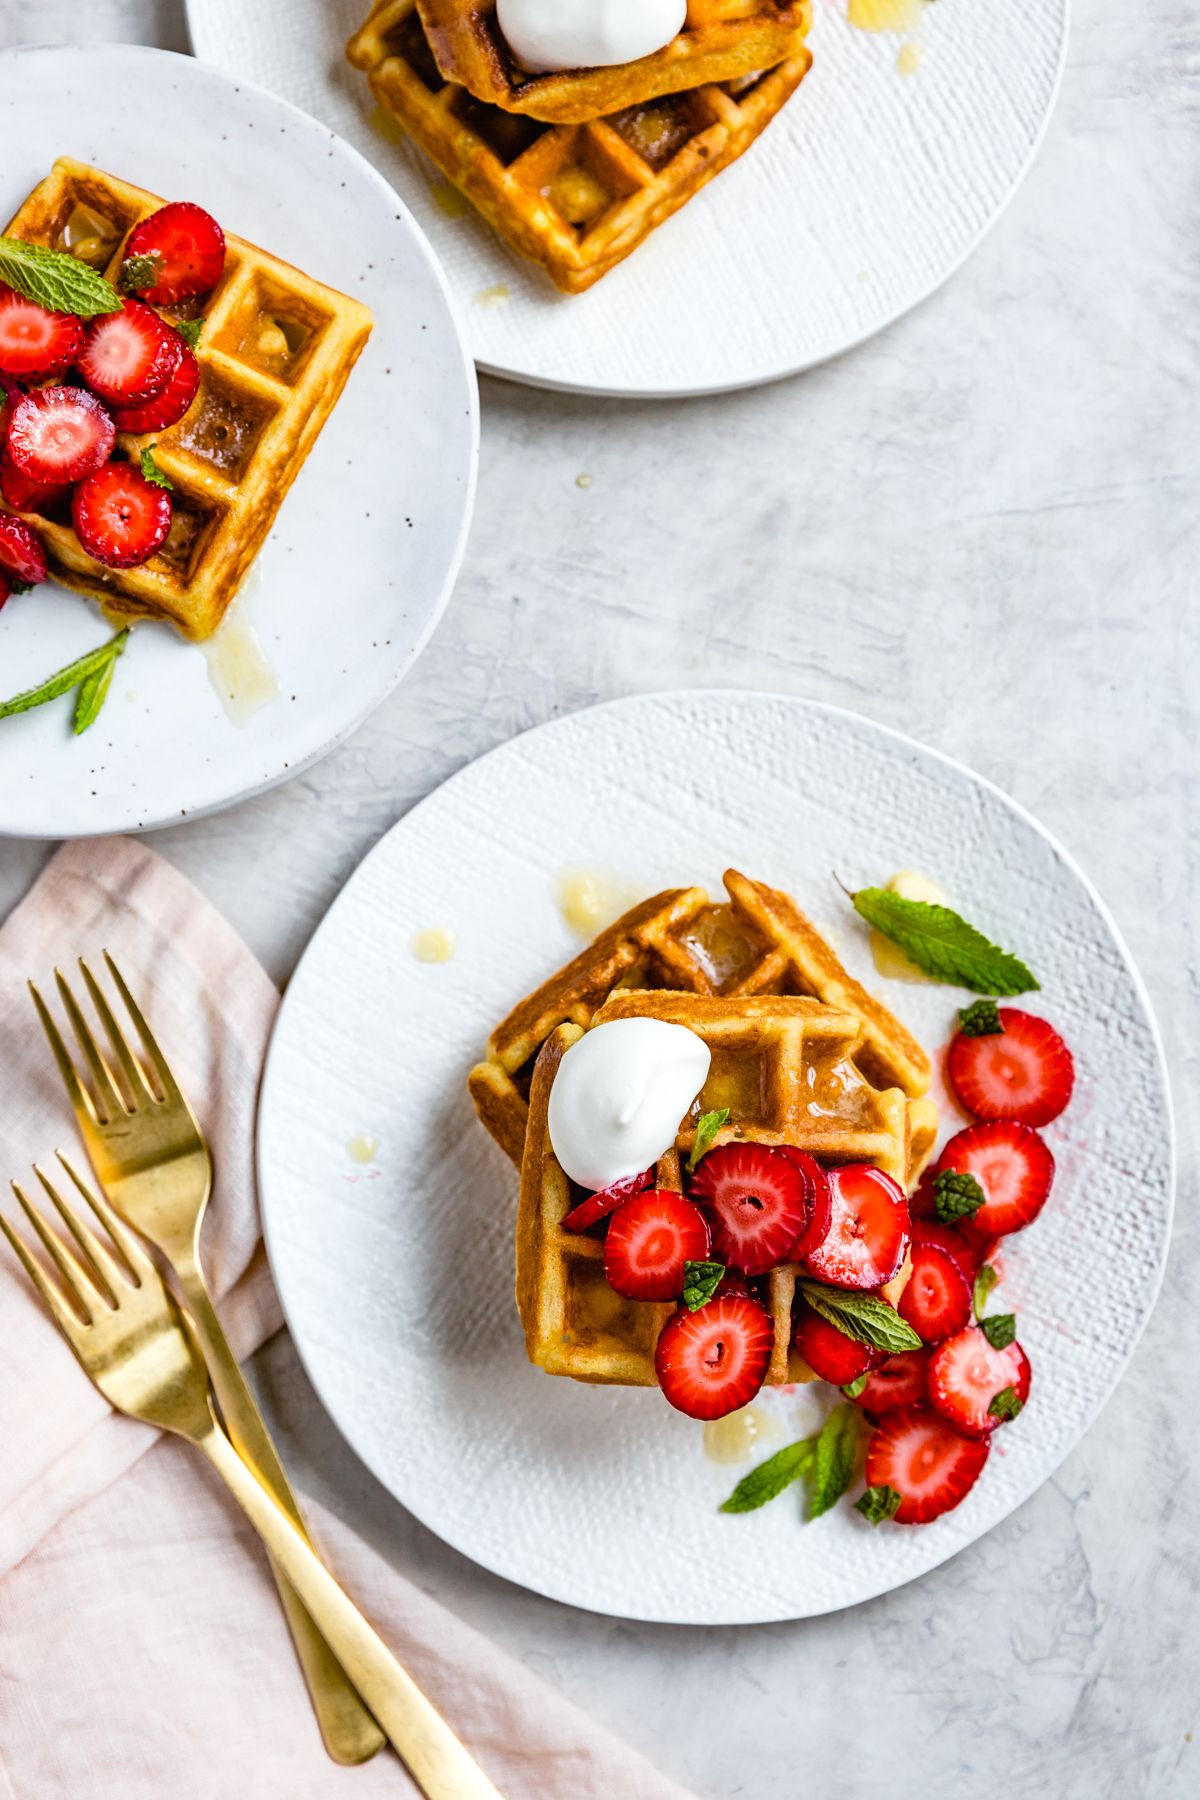 Gluten Free Gourmet Recipes
 Corn Flour Waffles with Whipped Honey Ghee and Berries